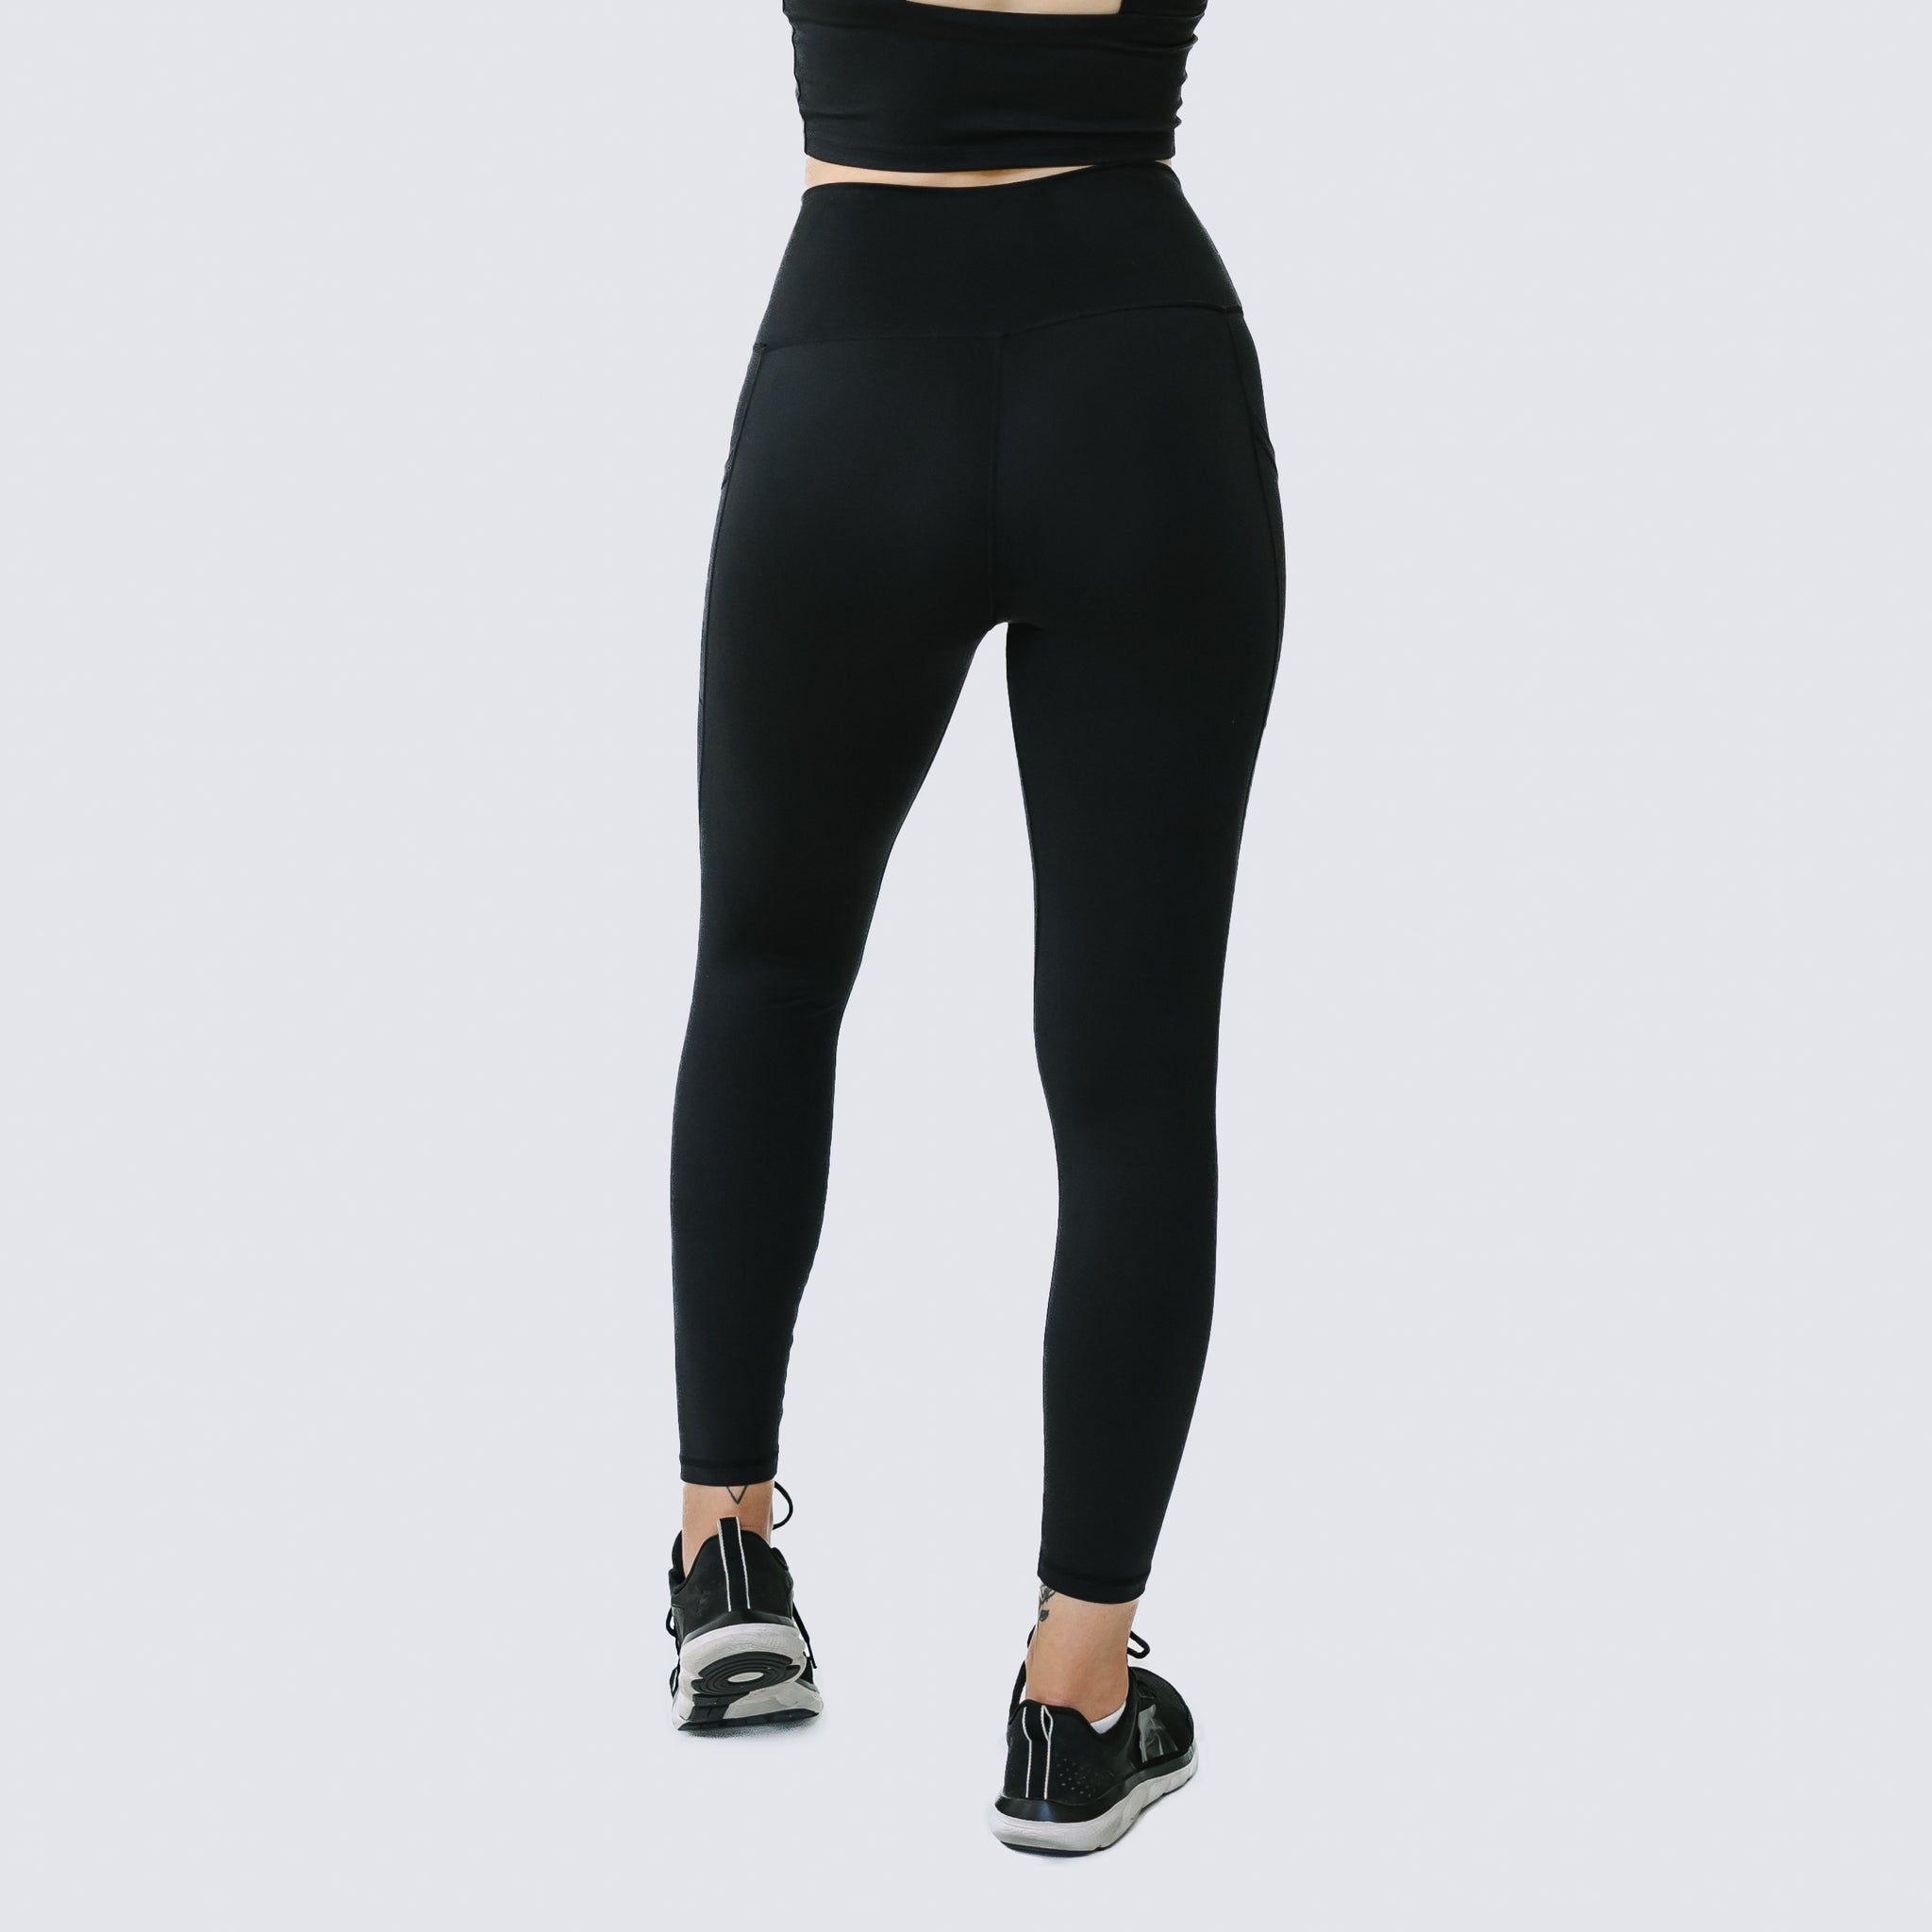 Gunna Want These- {Black & Navy} Buttery Soft Leggings – Proverbs